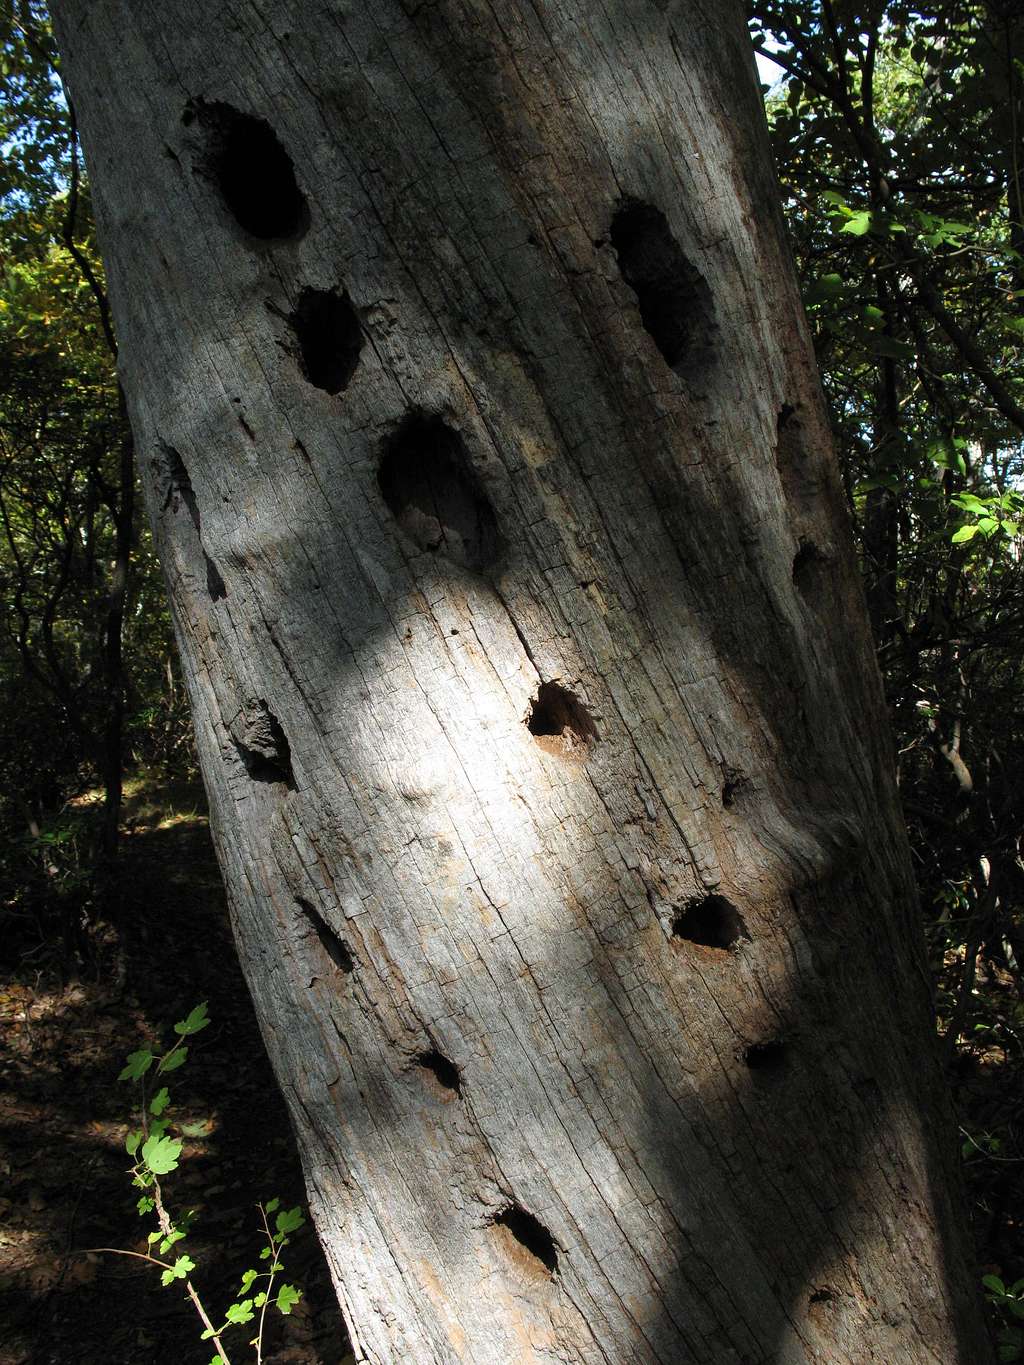 The Work of Woodpeckers